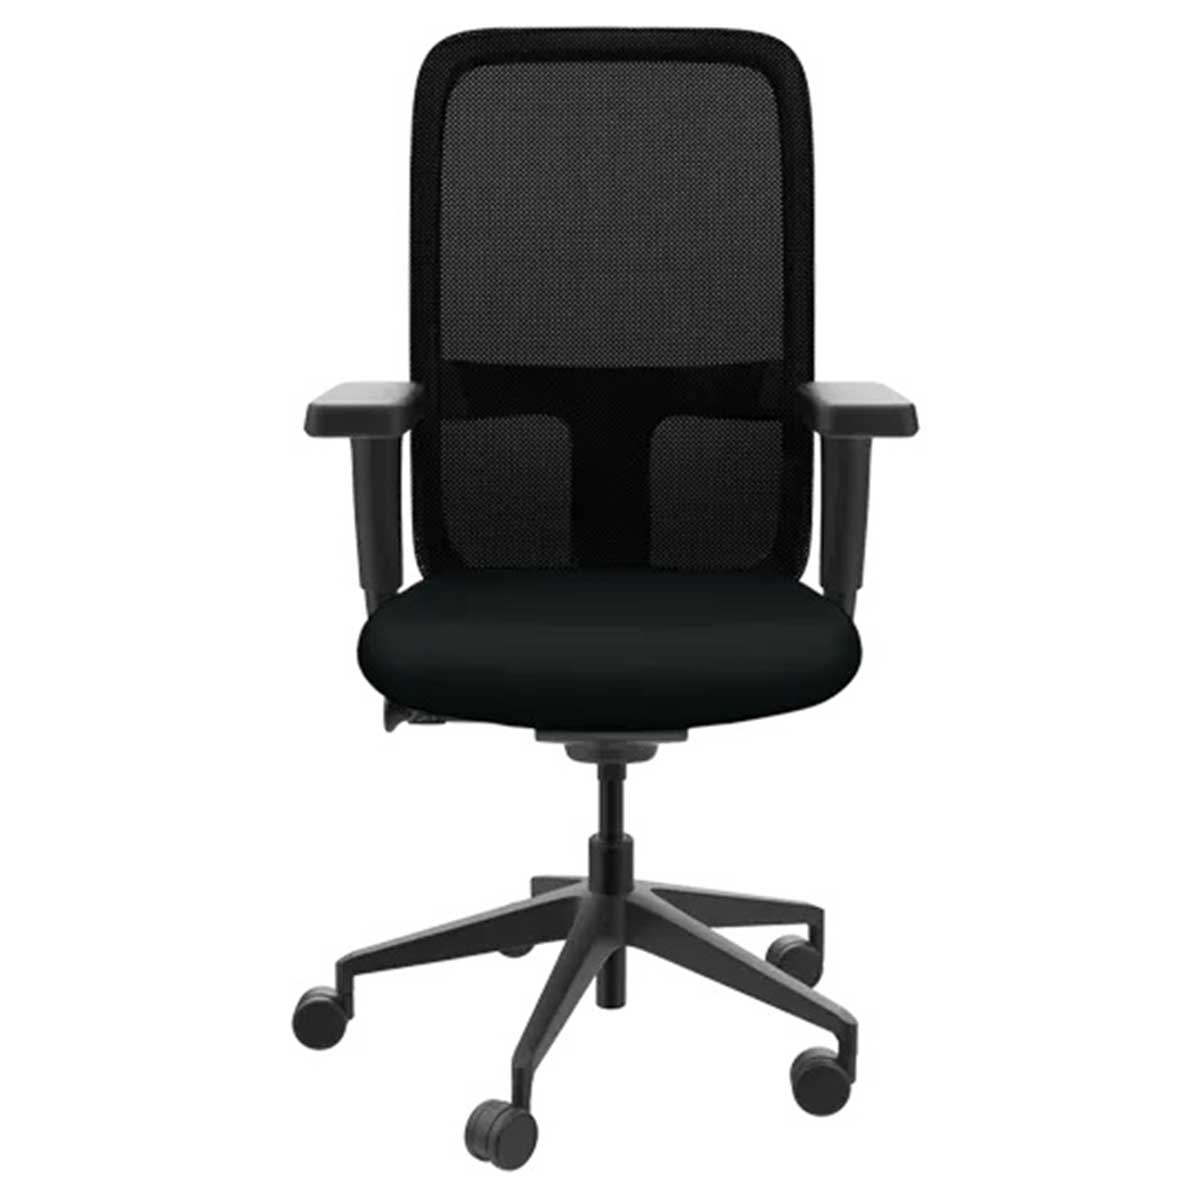 Revolving Chair Manufacturers, Suppliers in Sahibabad